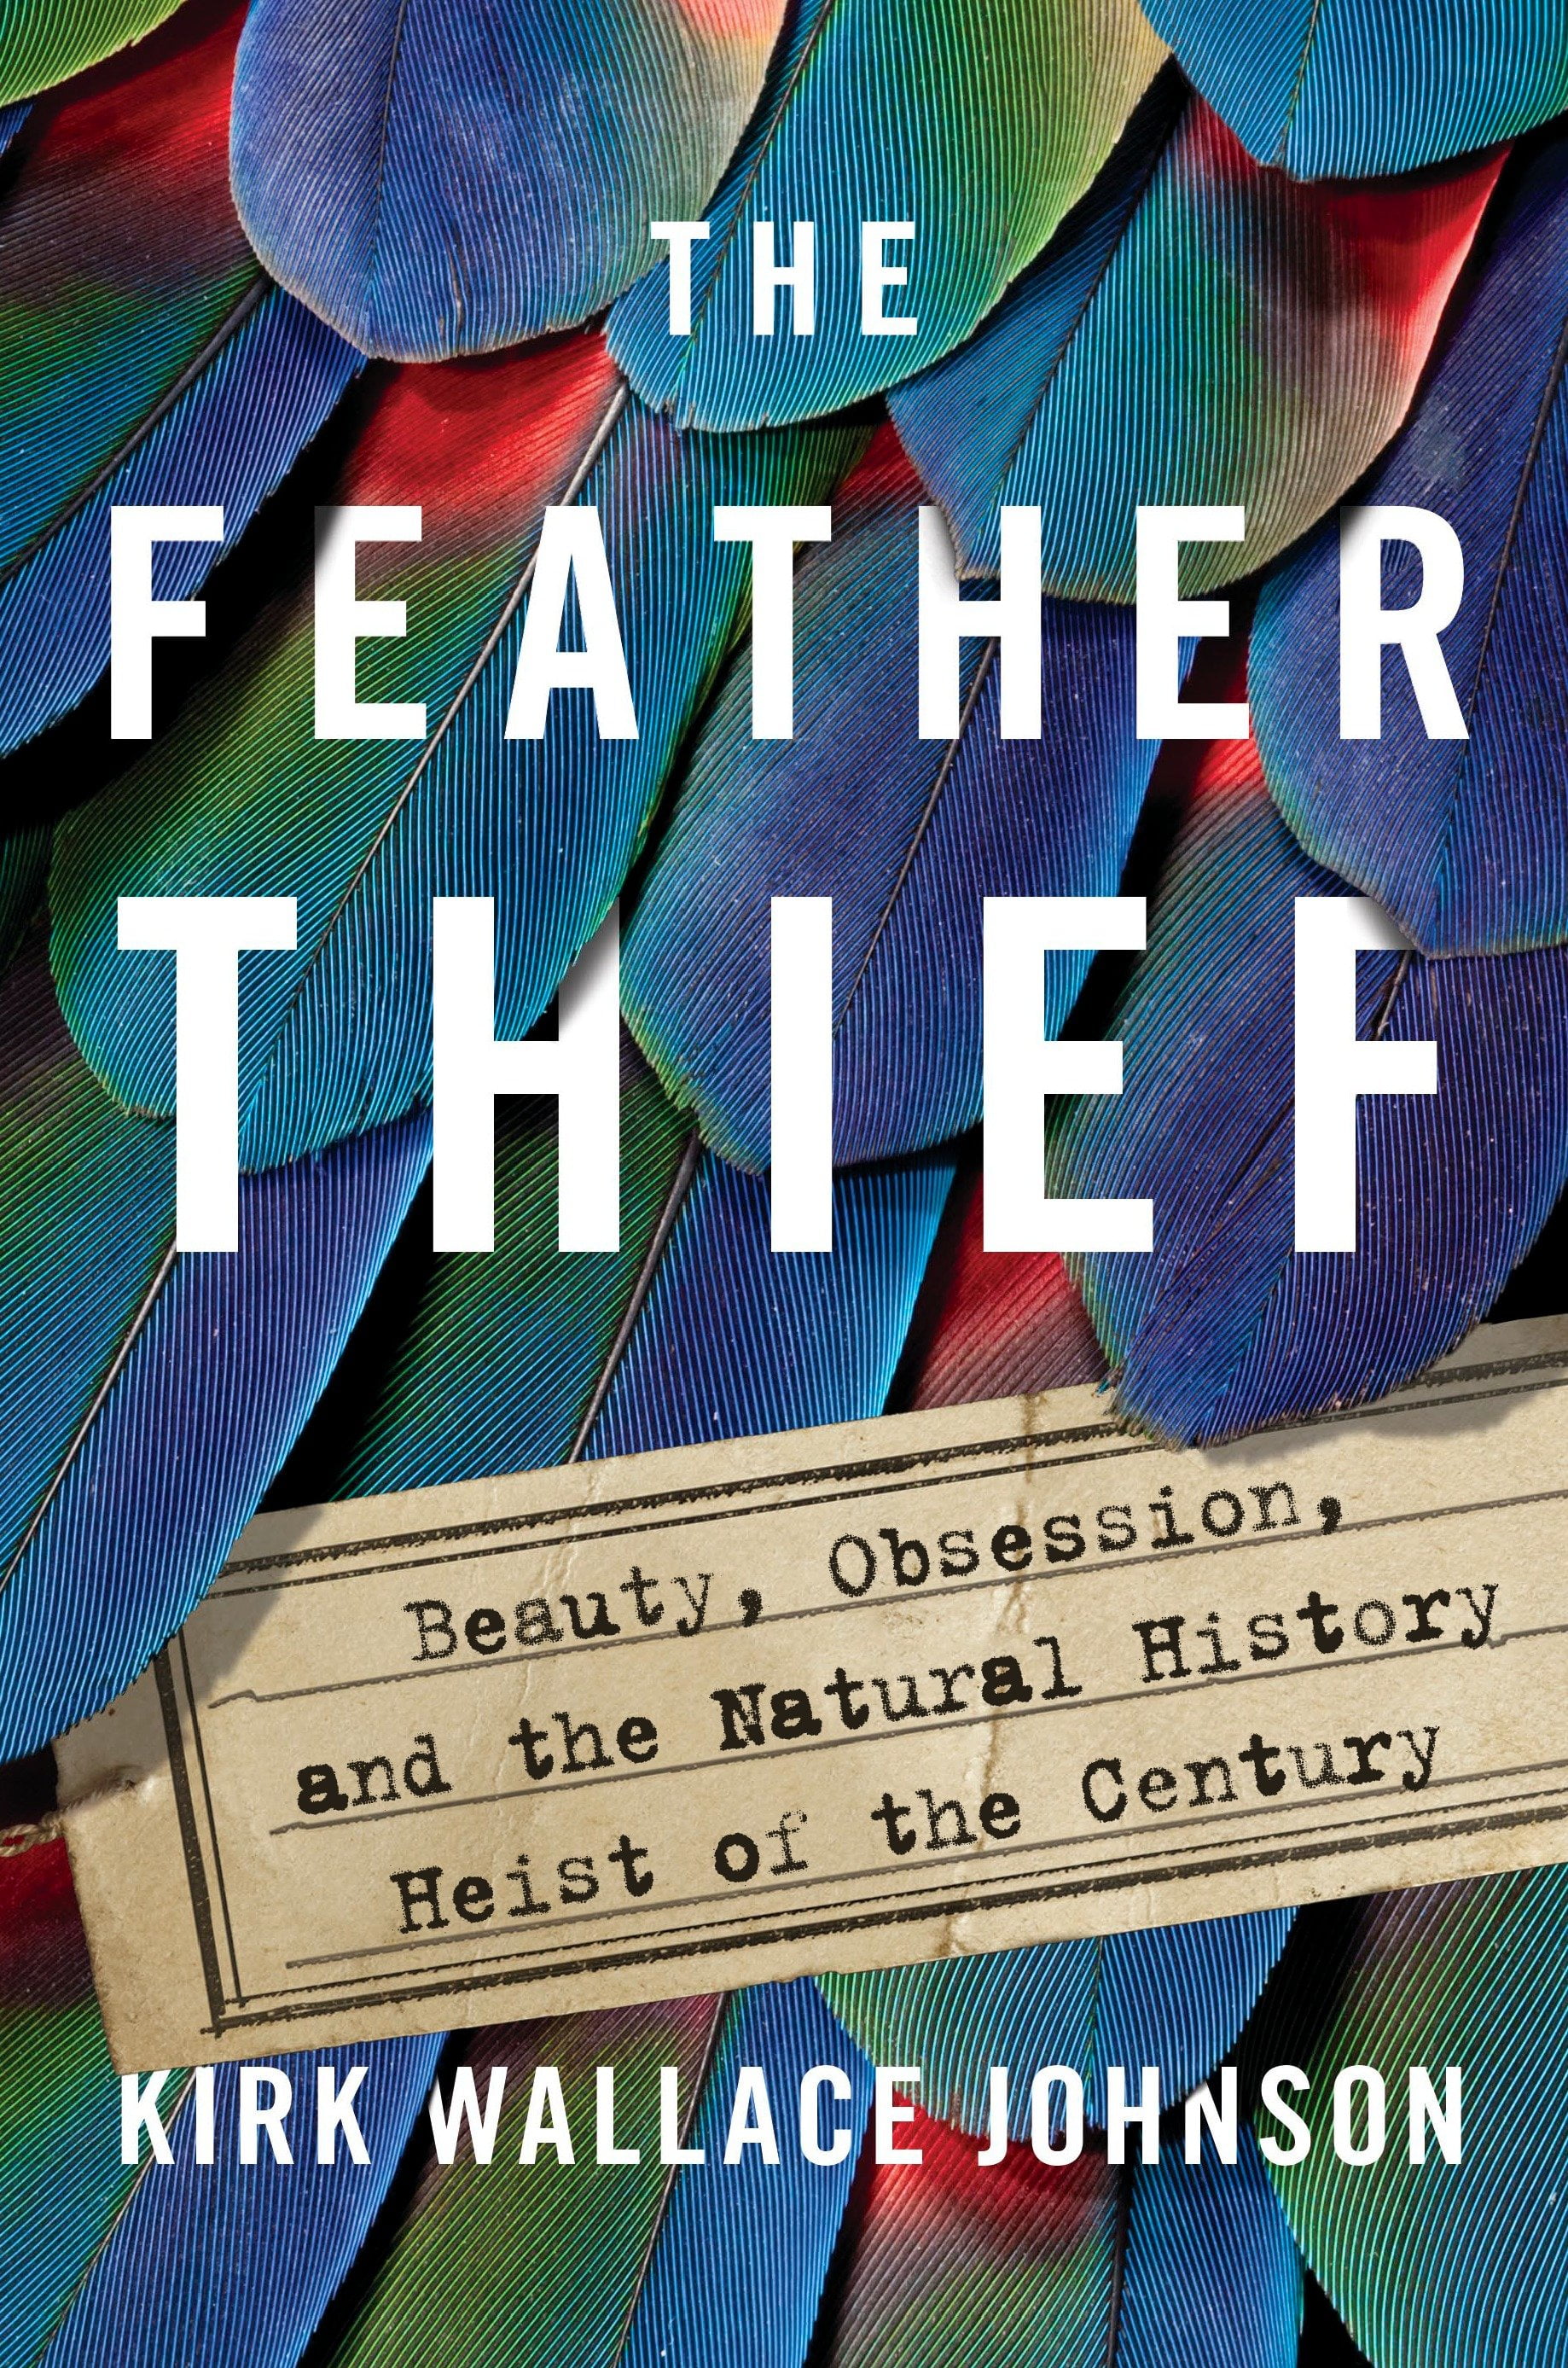 The-Feather-Thief-Beauty-Obsession-and-the-Natural-History-Heist-of-the-Century